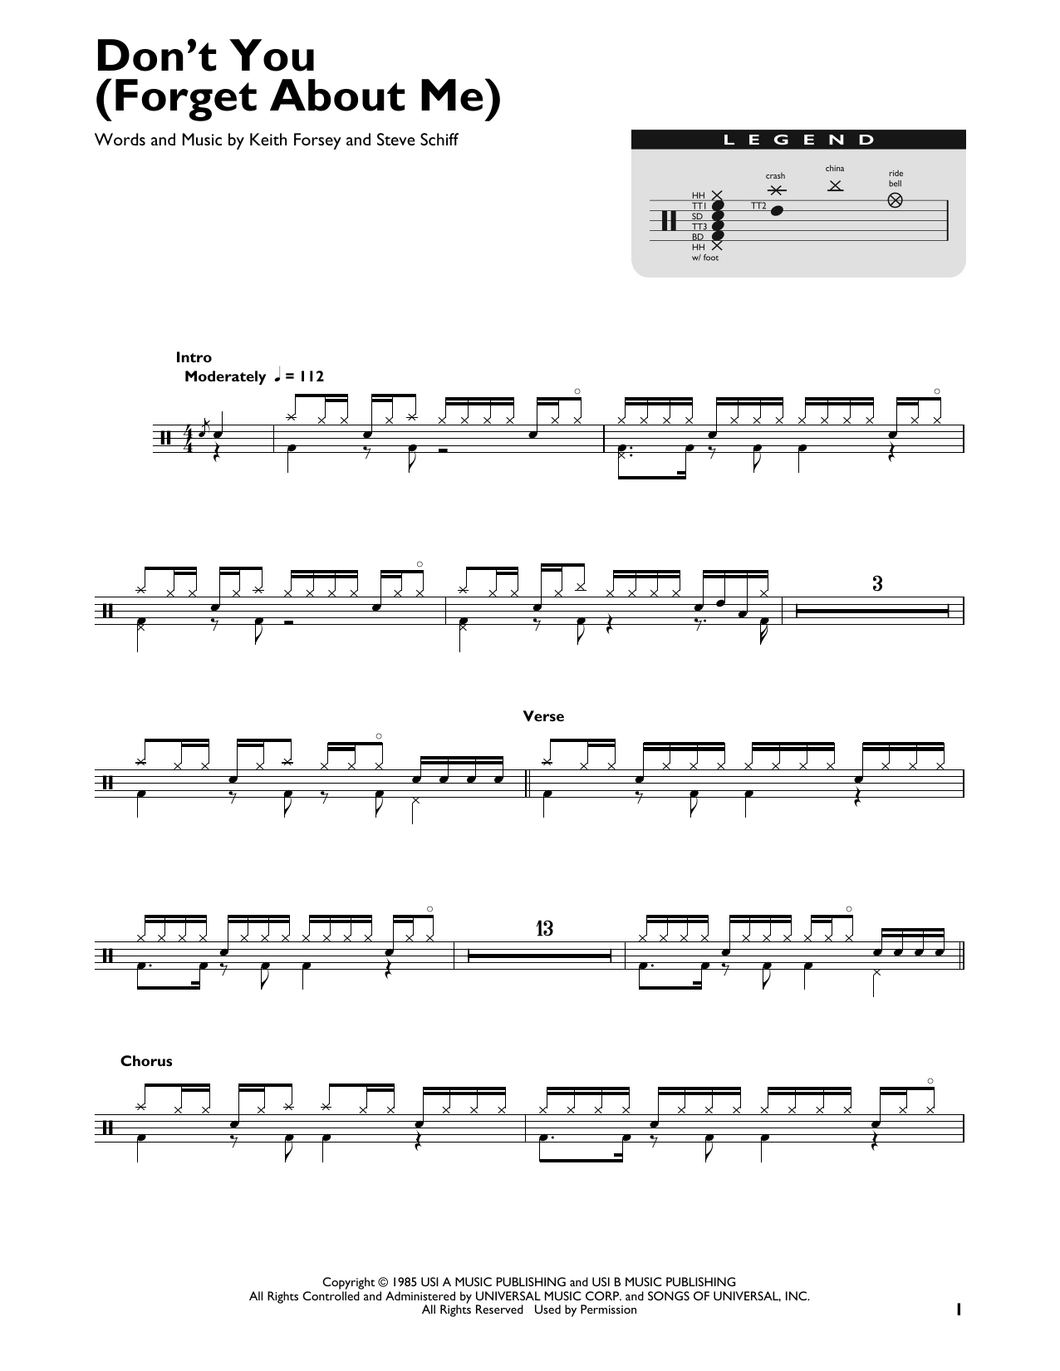 Don't You (Forget About Me) - Simple Minds - Full Drum Transcription / Drum Sheet Music - SheetMusicDirect DT